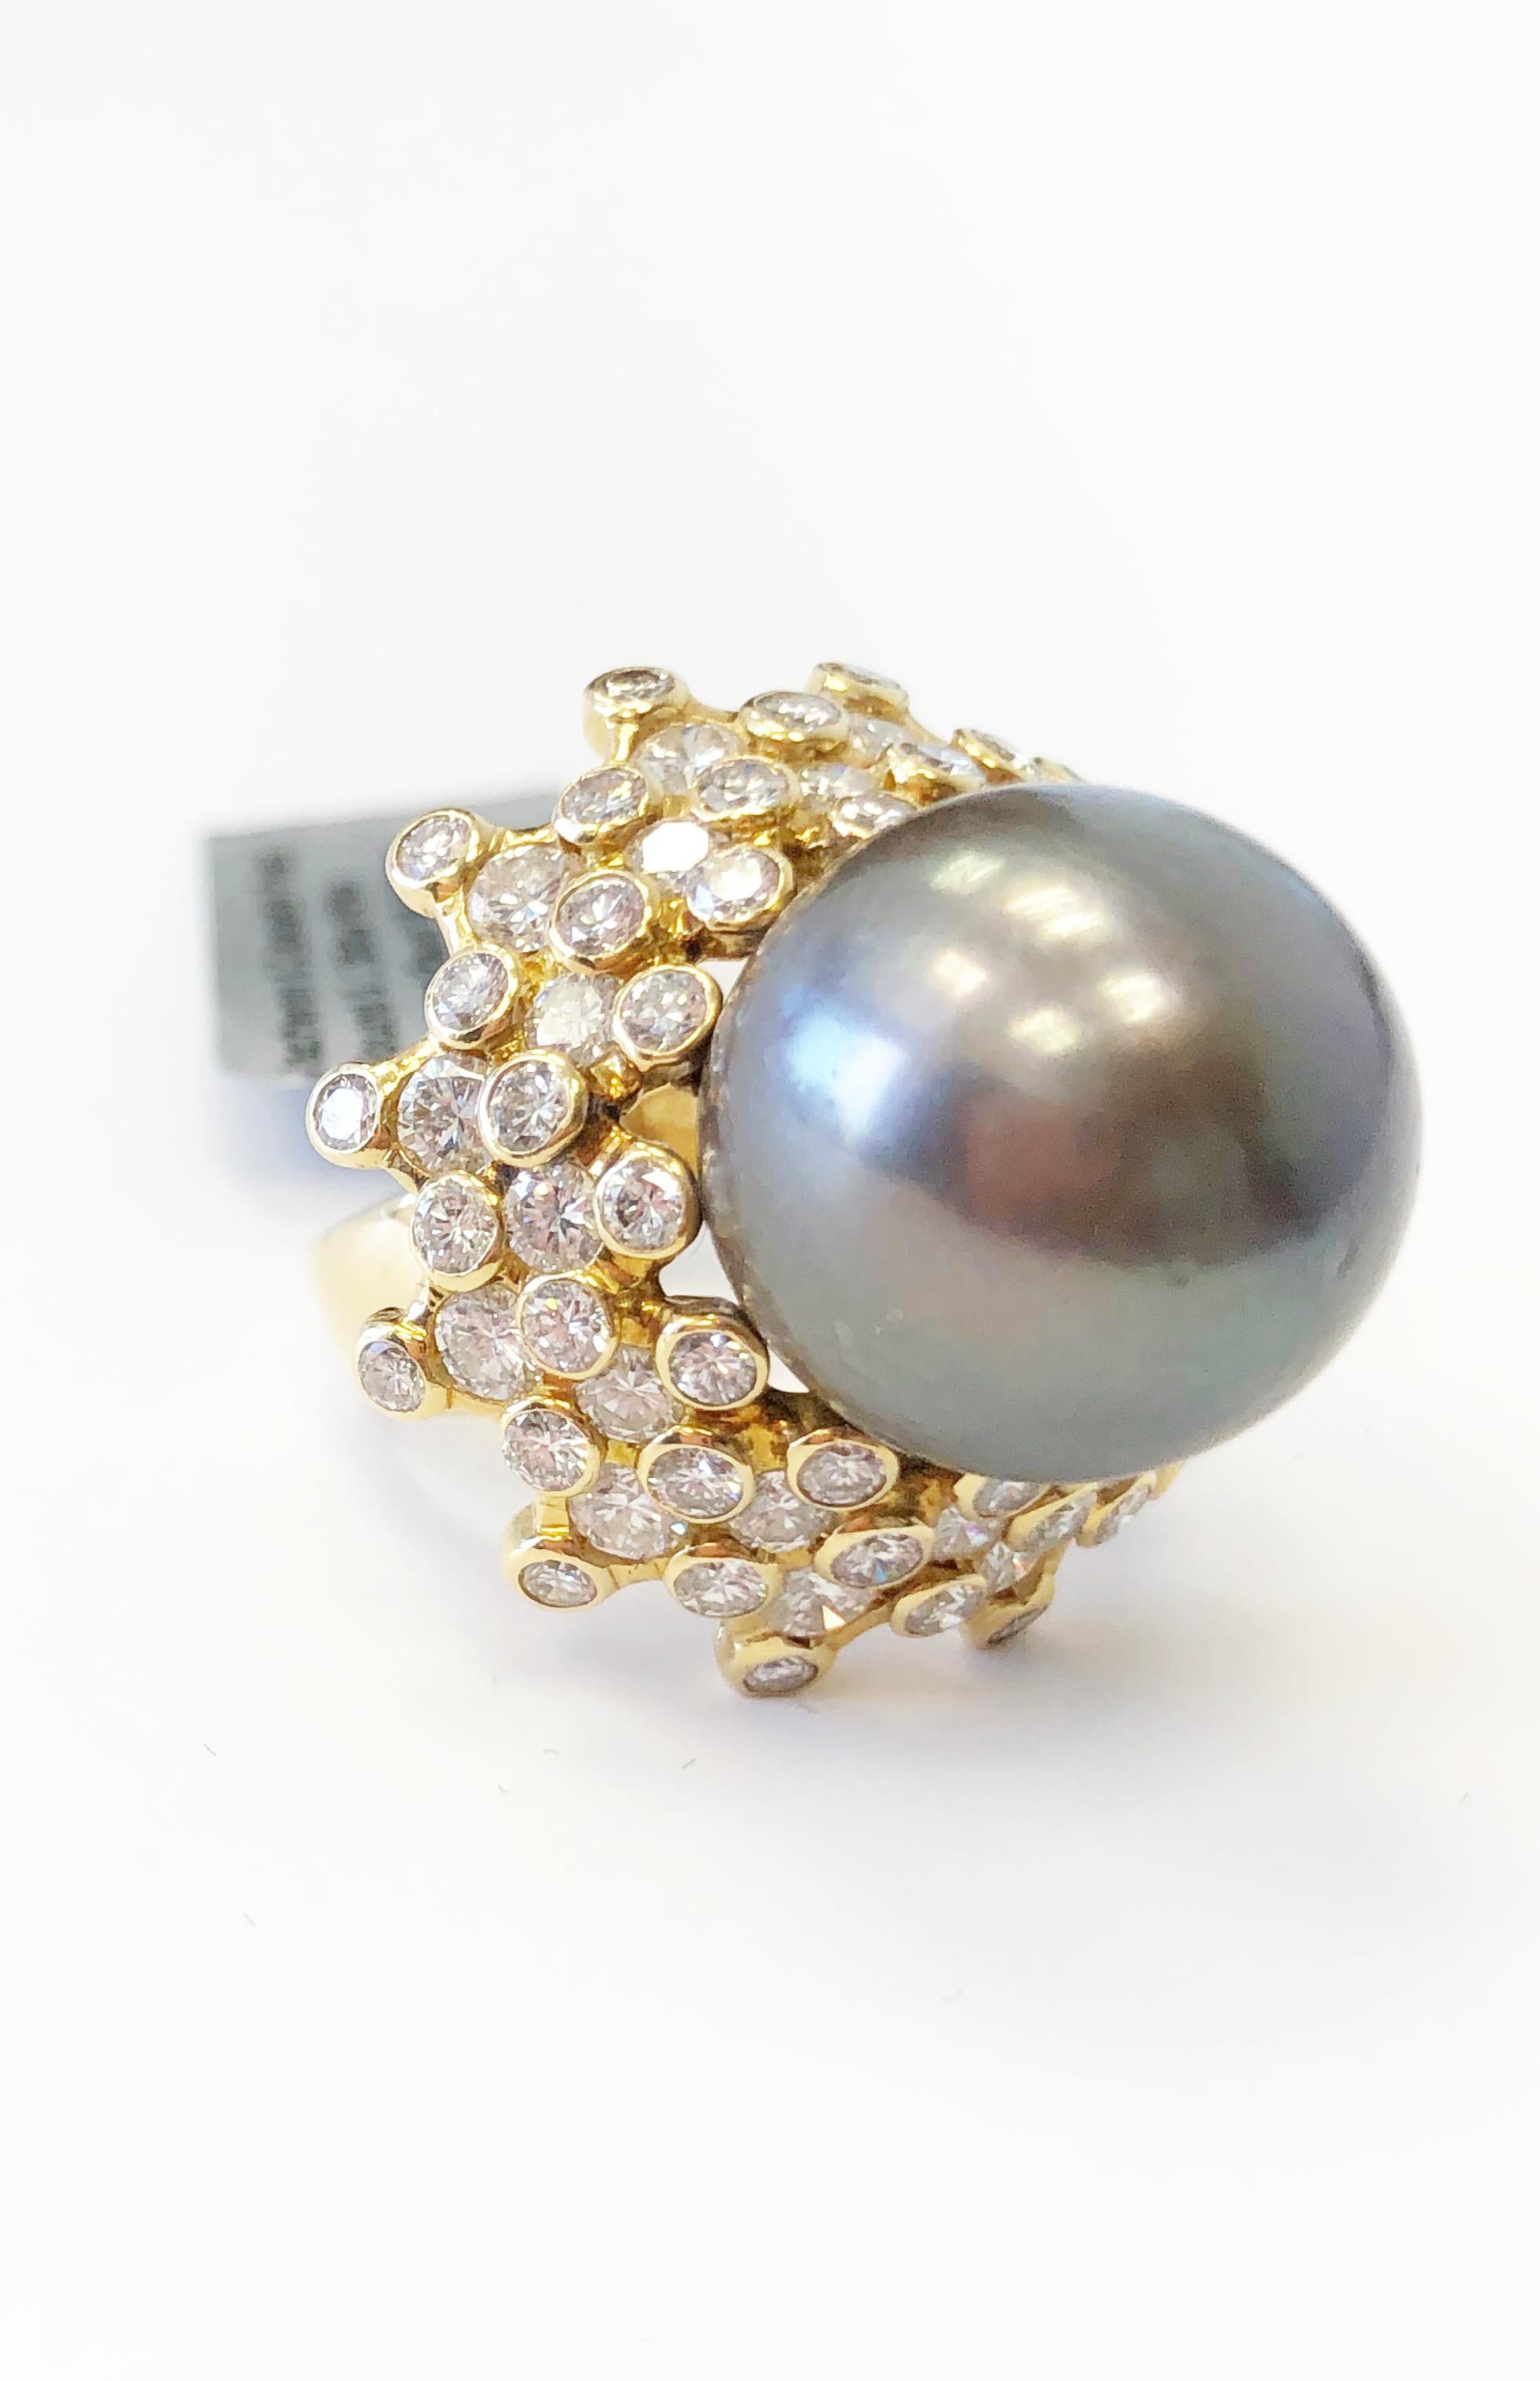 Beautiful Vacheron Constantin Tahitian pearl and diamond ring.  Good quality white diamonds weighing 2.95 carats in 18k yellow gold ring size 5.5.  This ring is perfect for any special occasion with it's classic feel and big look.


 